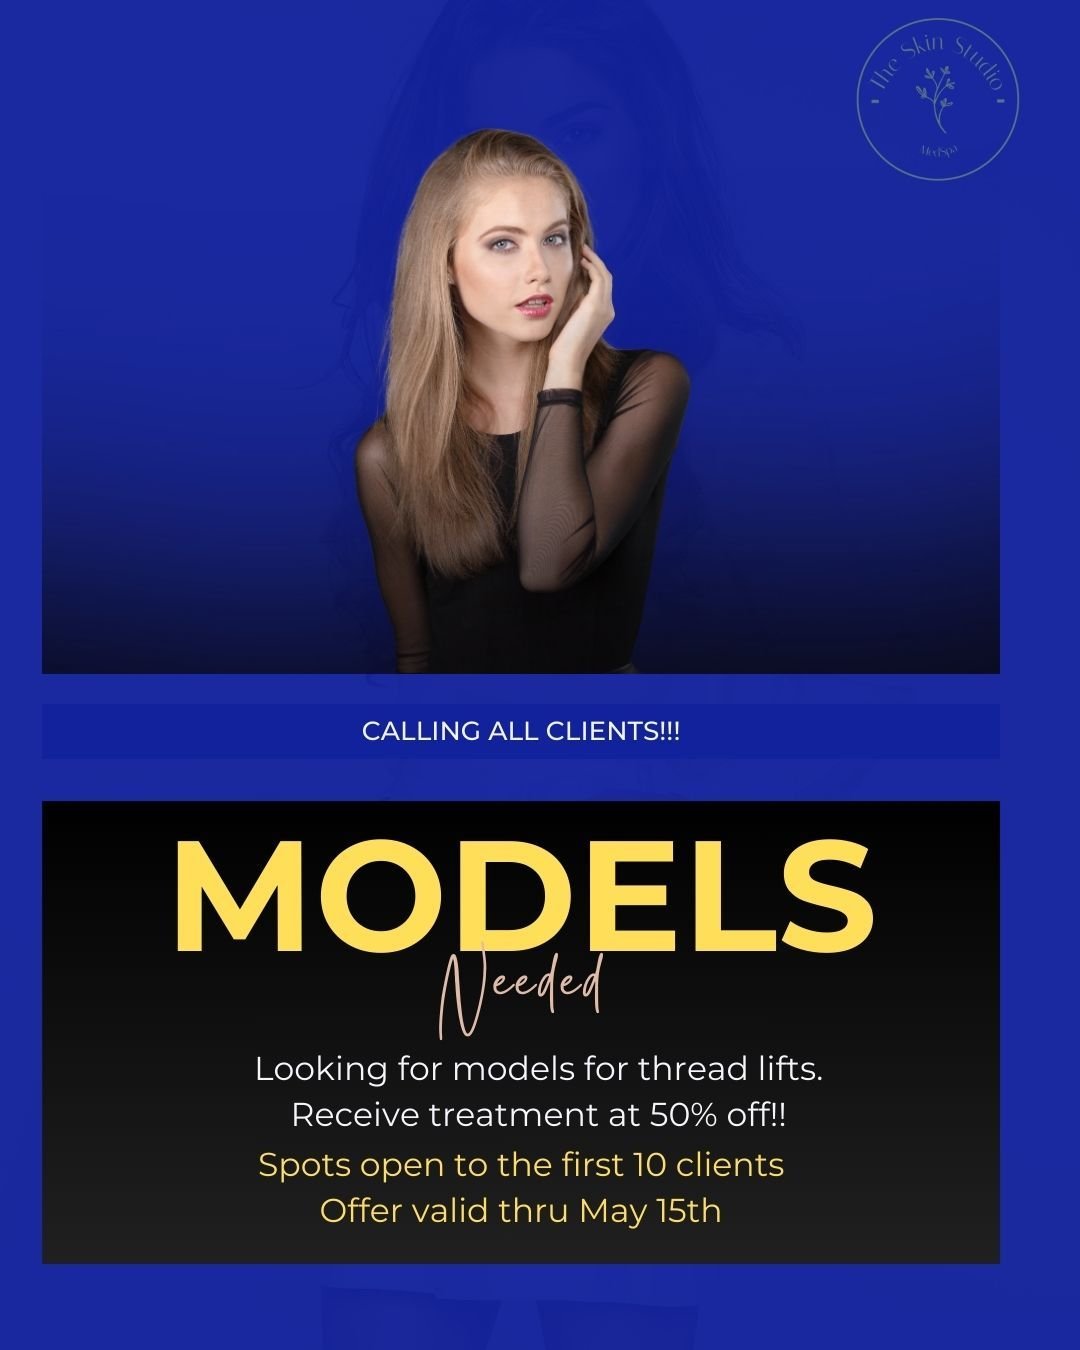 MODEL CALL!!!

I am looking for 10 models that are wanting a subtle, natural, and gentle enhancement!

Threads are an excellent alternative to fillers for lifting and adding contour. They have been around for decades in the surgical suites, and now t